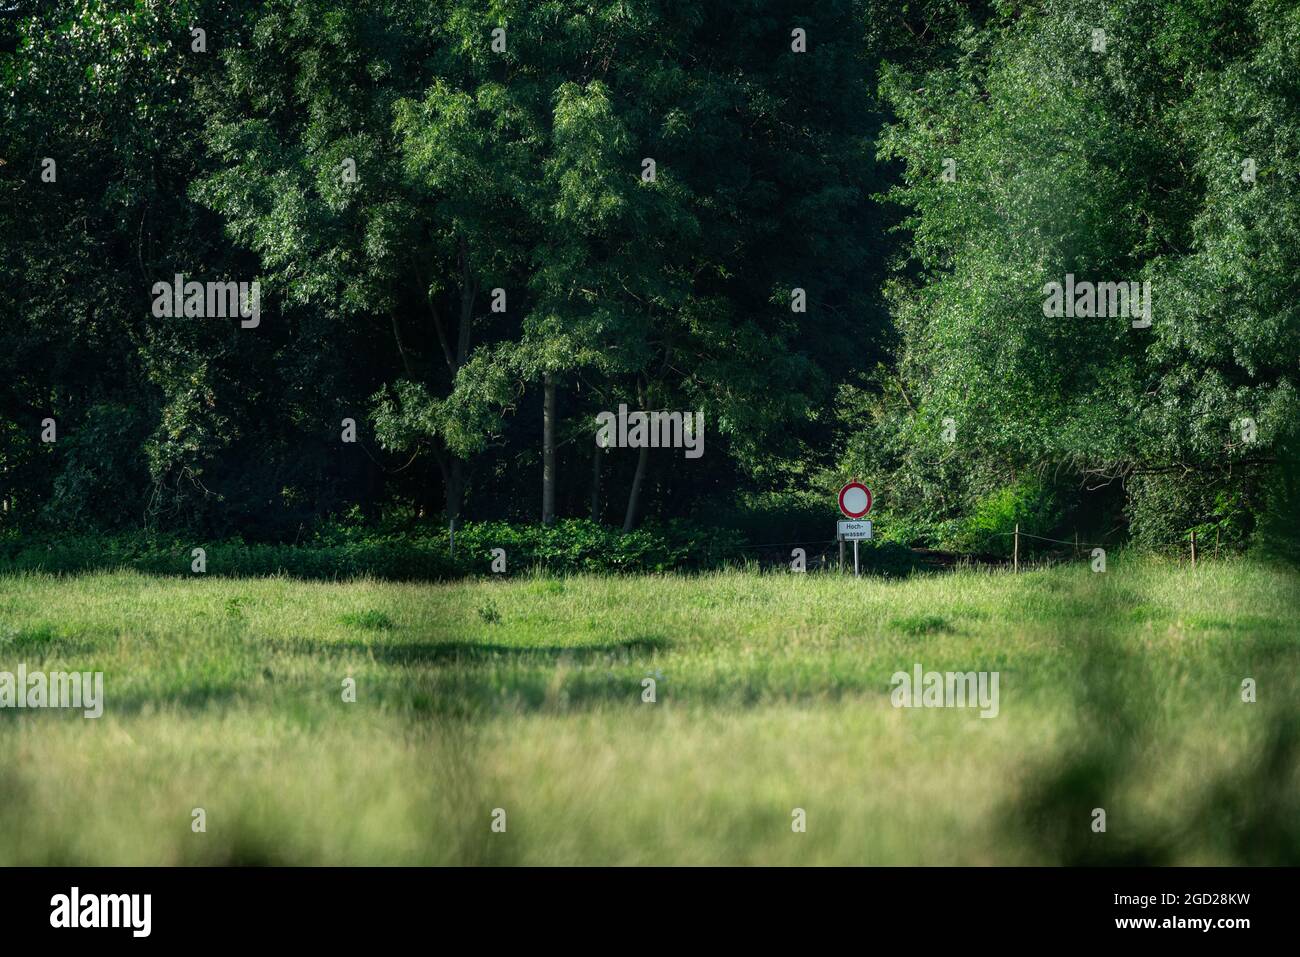 A floodplain meadow and a forest with with a trafic sign. Stock Photo